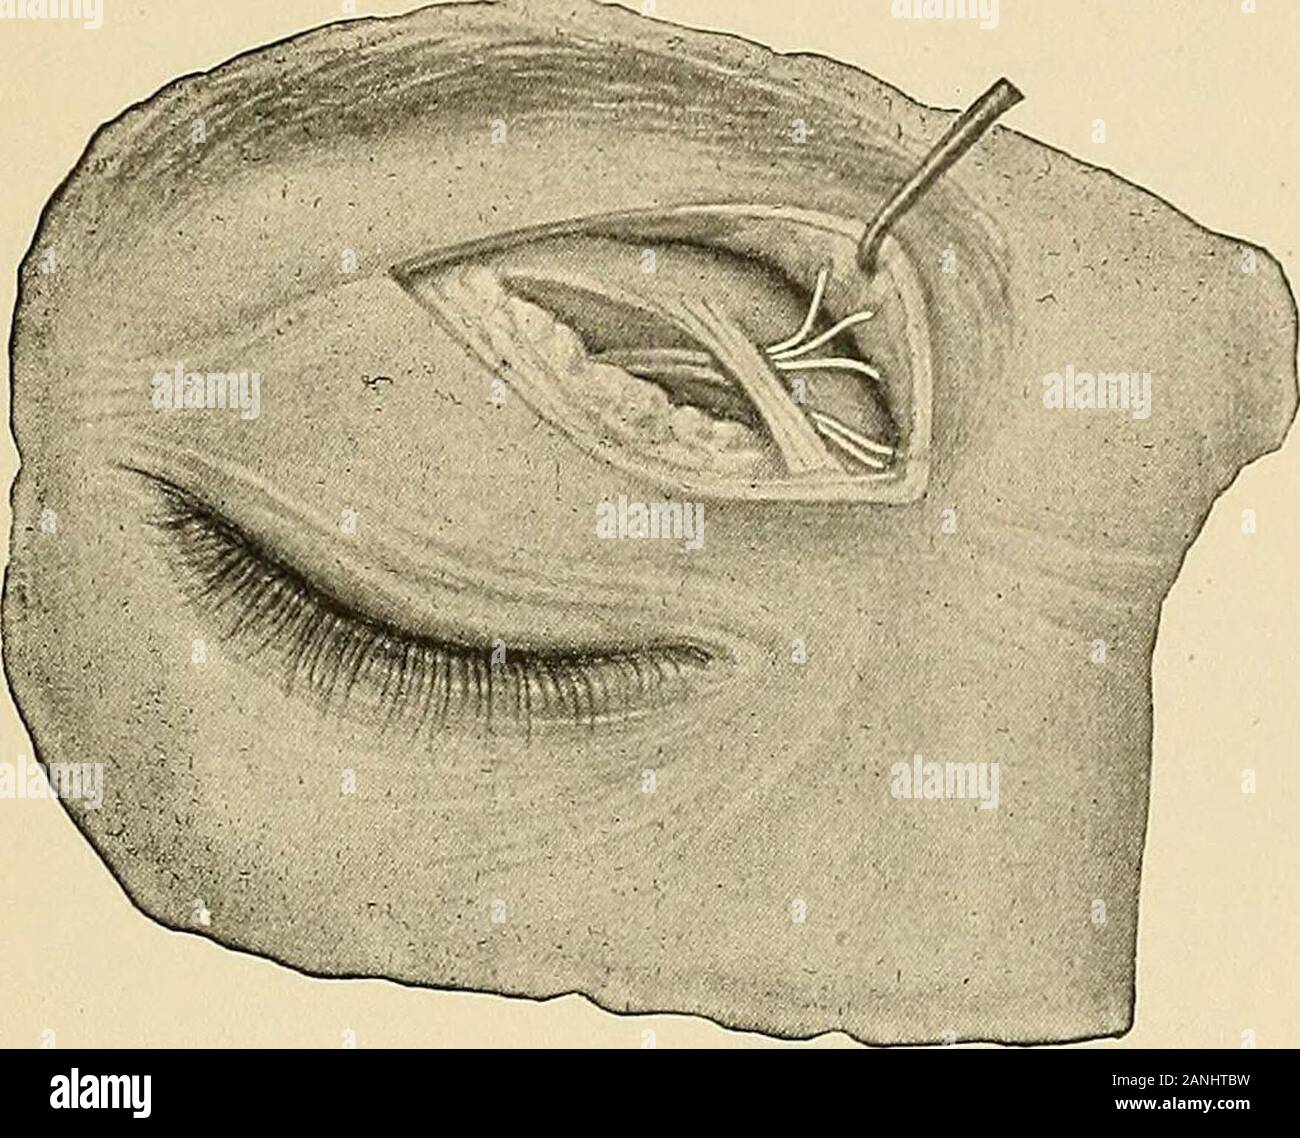 Oral surgery; a text-book on general surgery and medicine as applied to dentistry . ion is made over theinfraorbital foramen, the stem of the incision extendingdownward through the cheek. After the nerve is exposed,it may be torn from its peripheral attachment. It is nownecessary to open the canal by chiseling away the bone,making the opening sufficiently large to permit the nerveto be forced back along the floor of the orbit to near itsapex. This is done with a narrow periosteal elevator. Thenerve thus freed is grasped as deeply down as possible bya narrow but strong forceps, and by tugging a Stock Photo